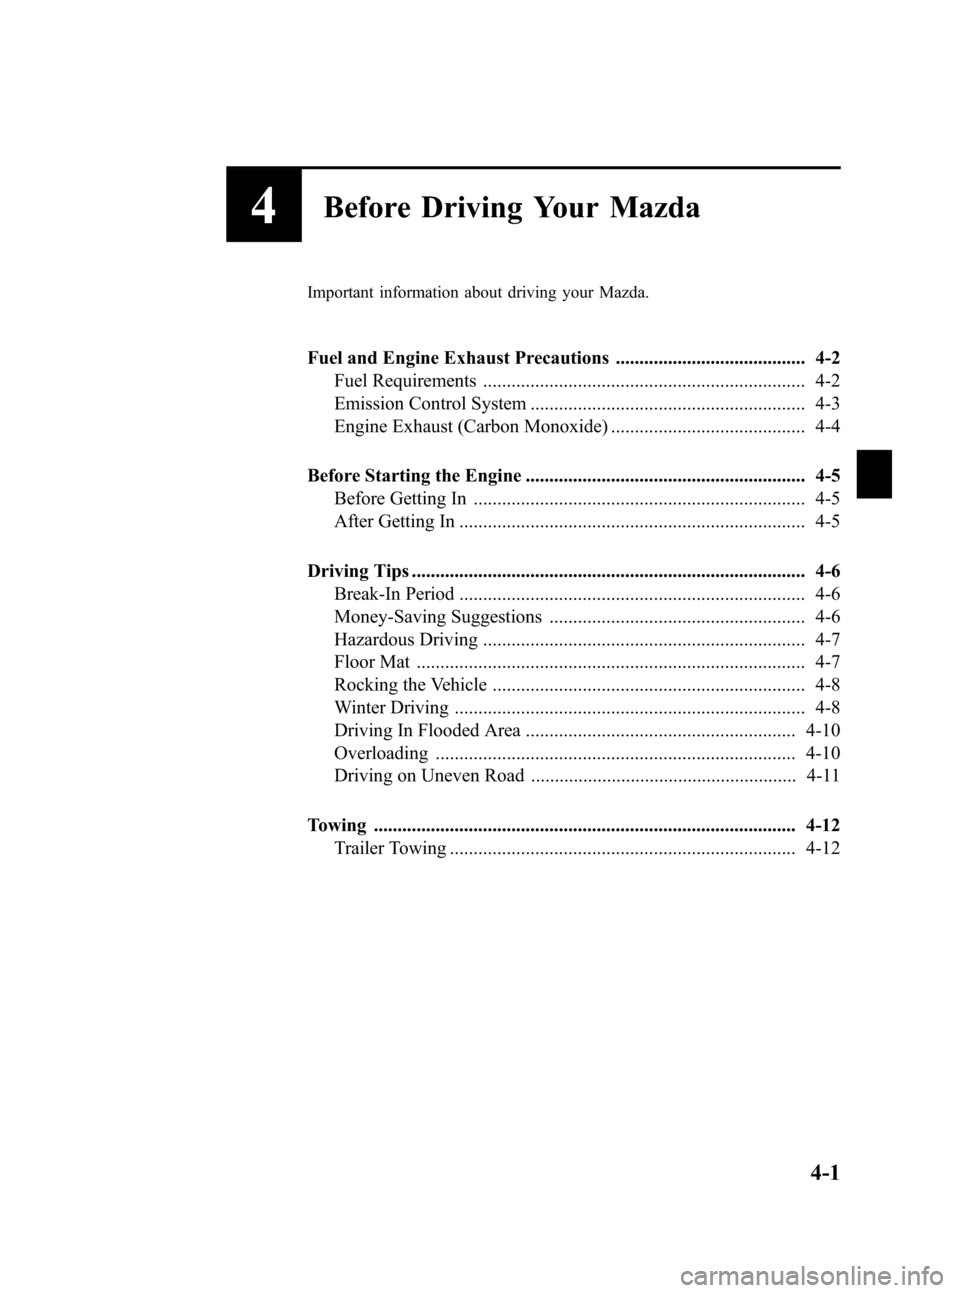 MAZDA MODEL 3 HATCHBACK 2010  Owners Manual (in English) Black plate (145,1)
4Before Driving Your Mazda
Important information about driving your Mazda.
Fuel and Engine Exhaust Precautions ........................................ 4-2
Fuel Requirements ......